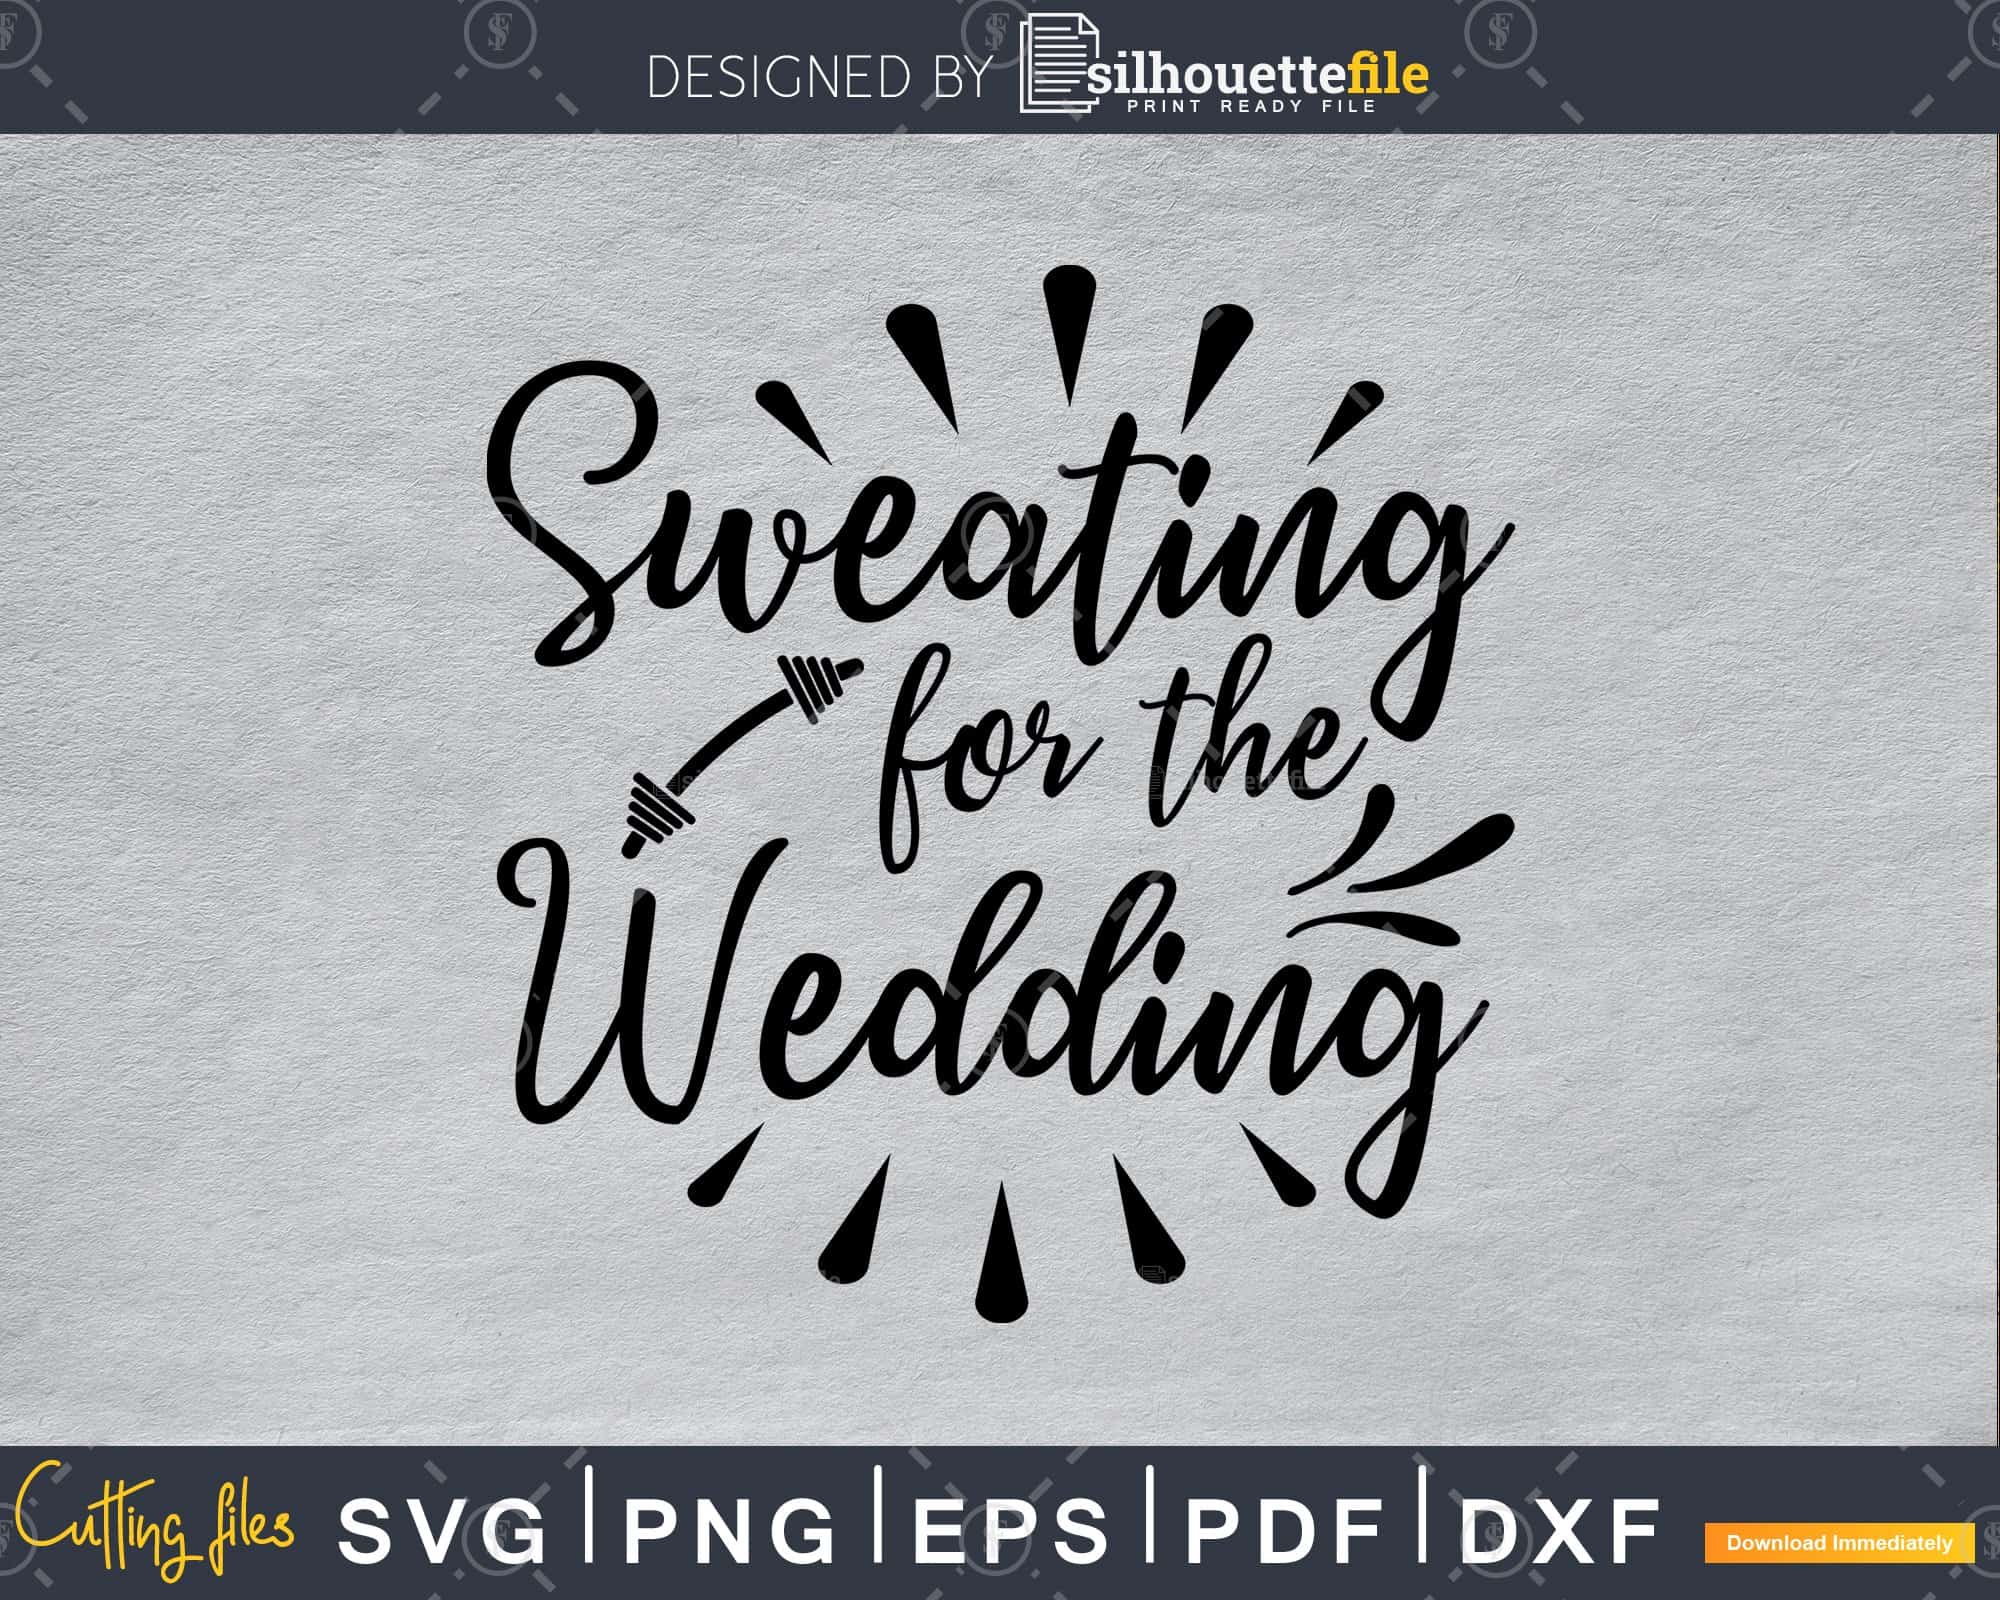 Download Sweating For The Wedding Svg Digital Printable Cut File Silhouettefile